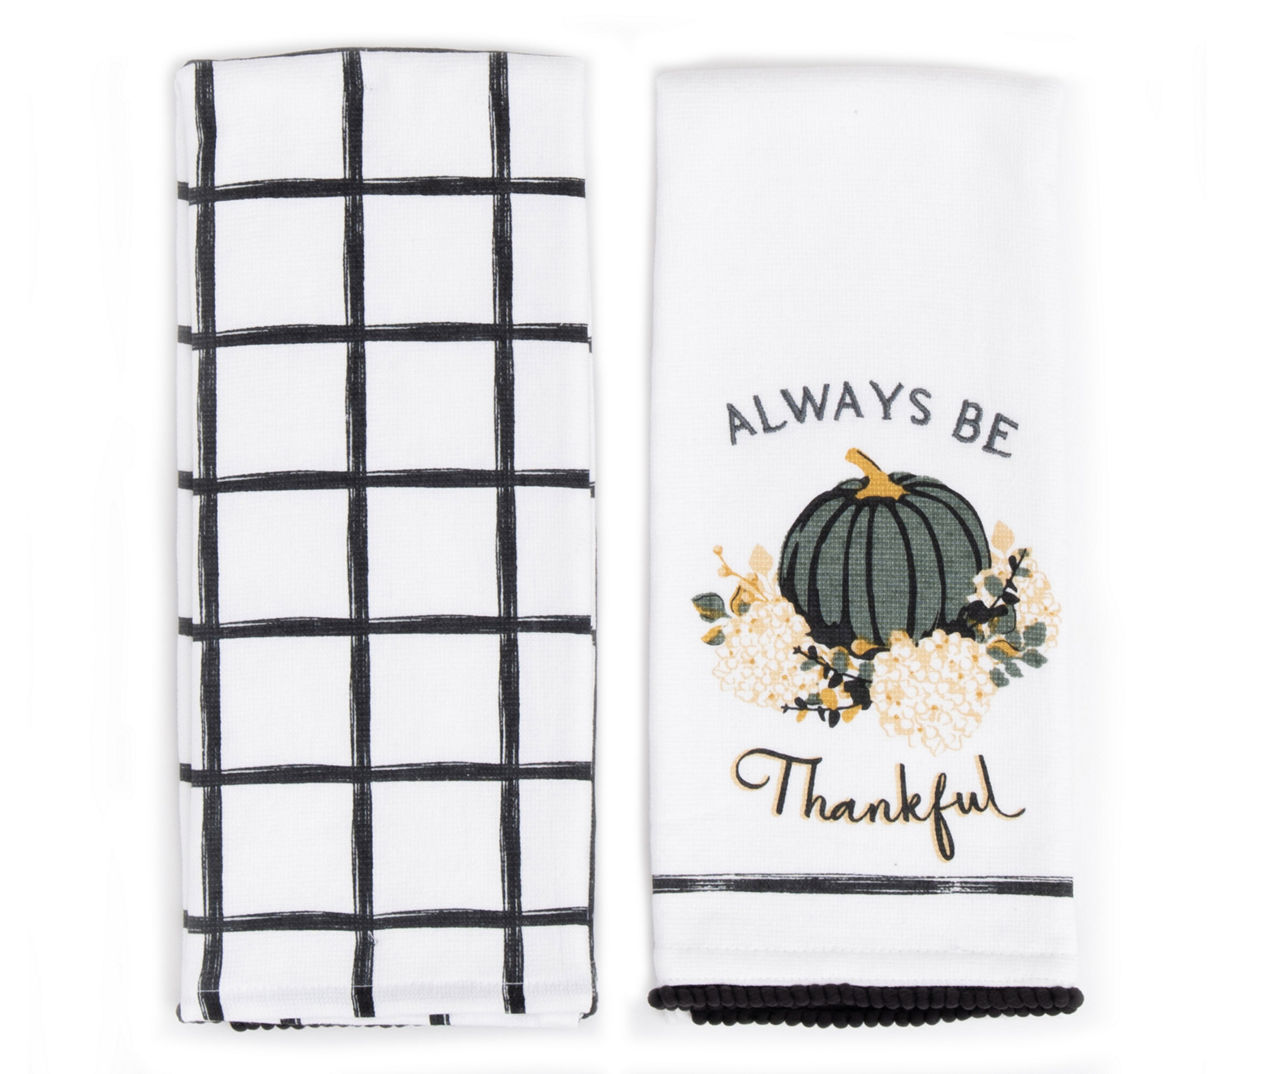  Beisseid Hanging Kitchen Towels Pumpkins Harvest Fruits Hand  Towels with Loop White Backdrop Hand Dish Towel Absorbent Tea Towels 2 Pcs  : Home & Kitchen